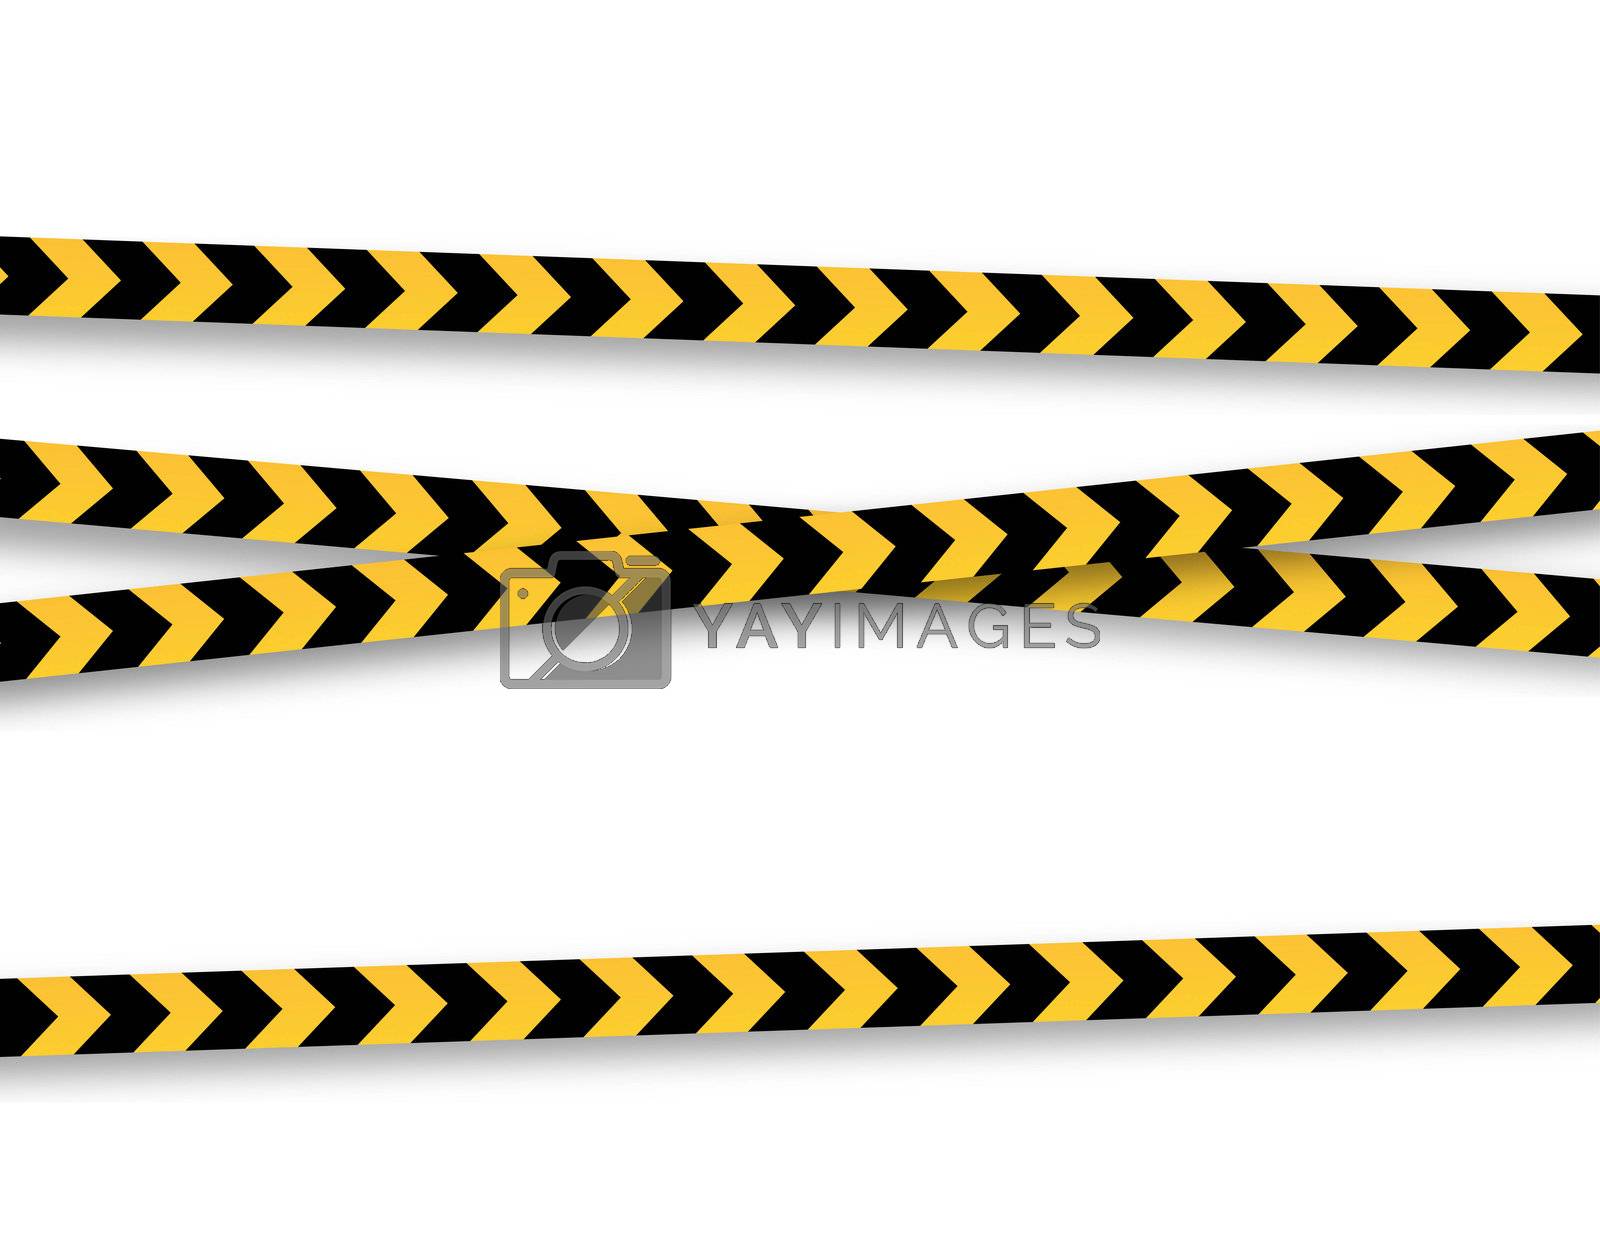 Royalty free image of Caution by leeser